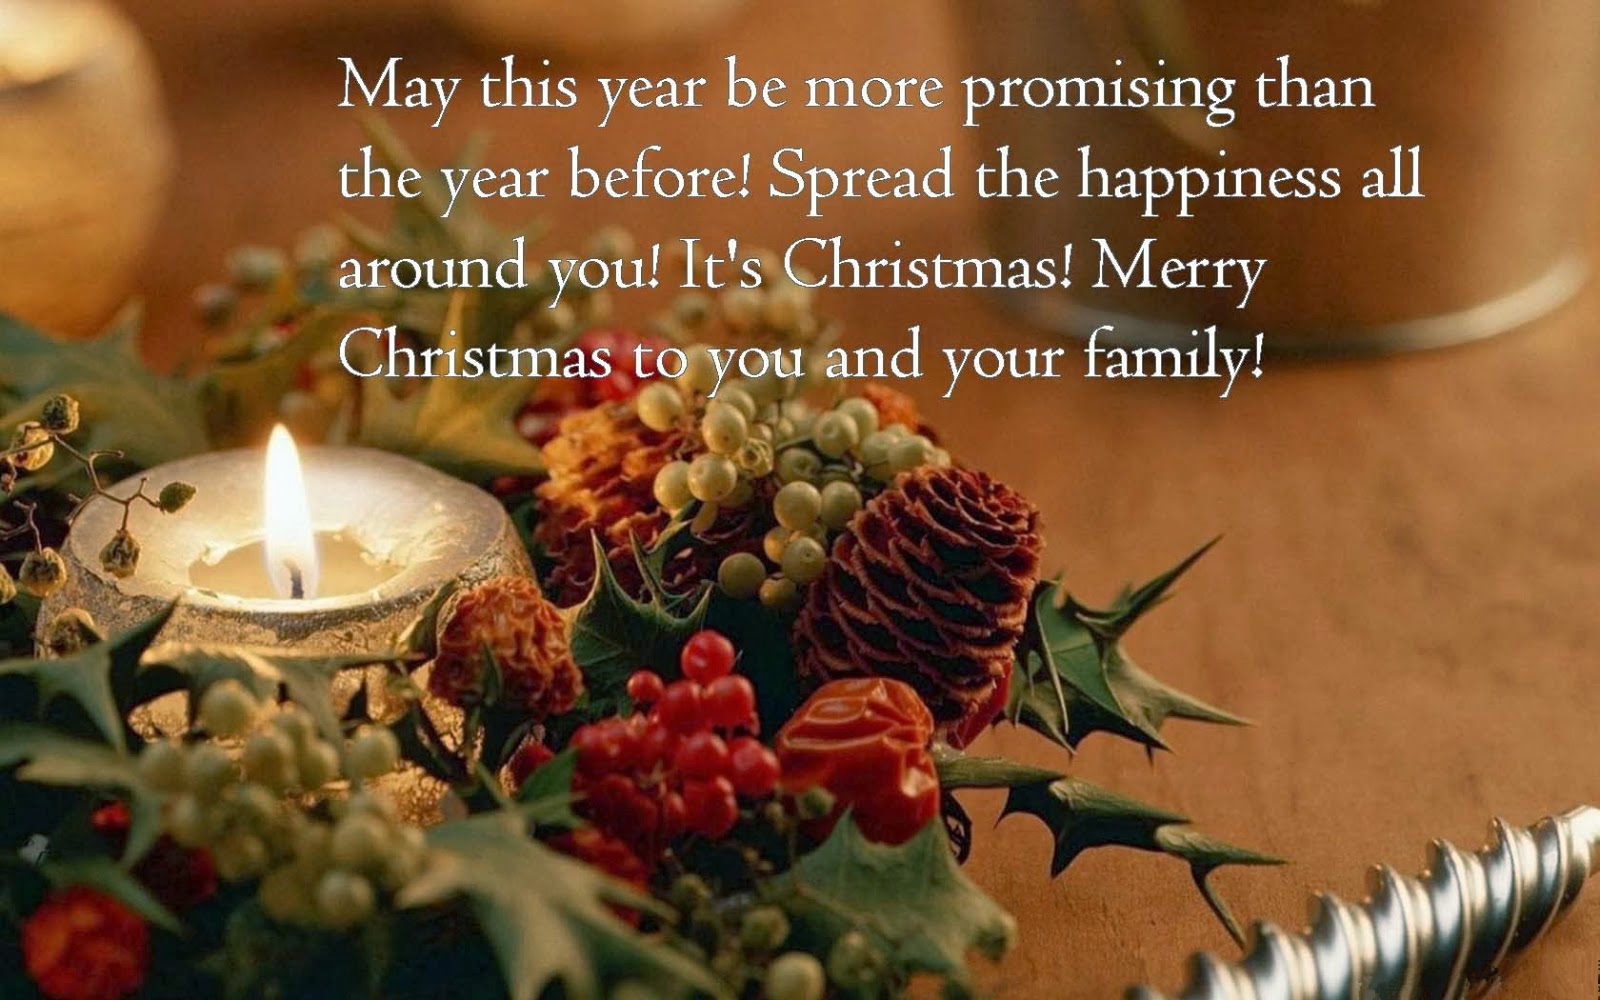 Greetingsforchristmas Best Christmas Wishes Greetings Ideas For Friends Family